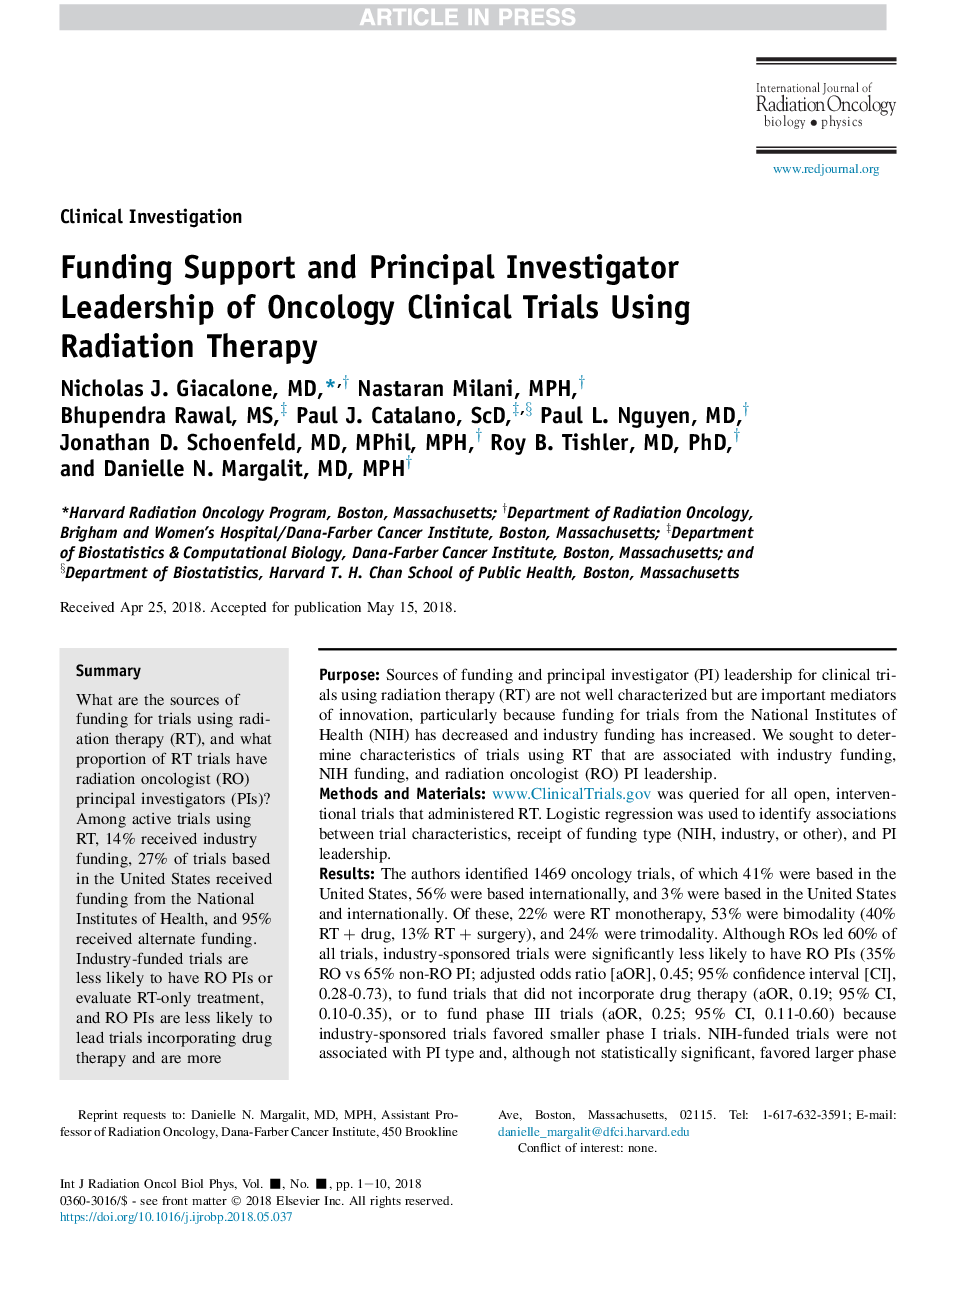 Funding Support and Principal Investigator Leadership of Oncology Clinical Trials Using Radiation Therapy